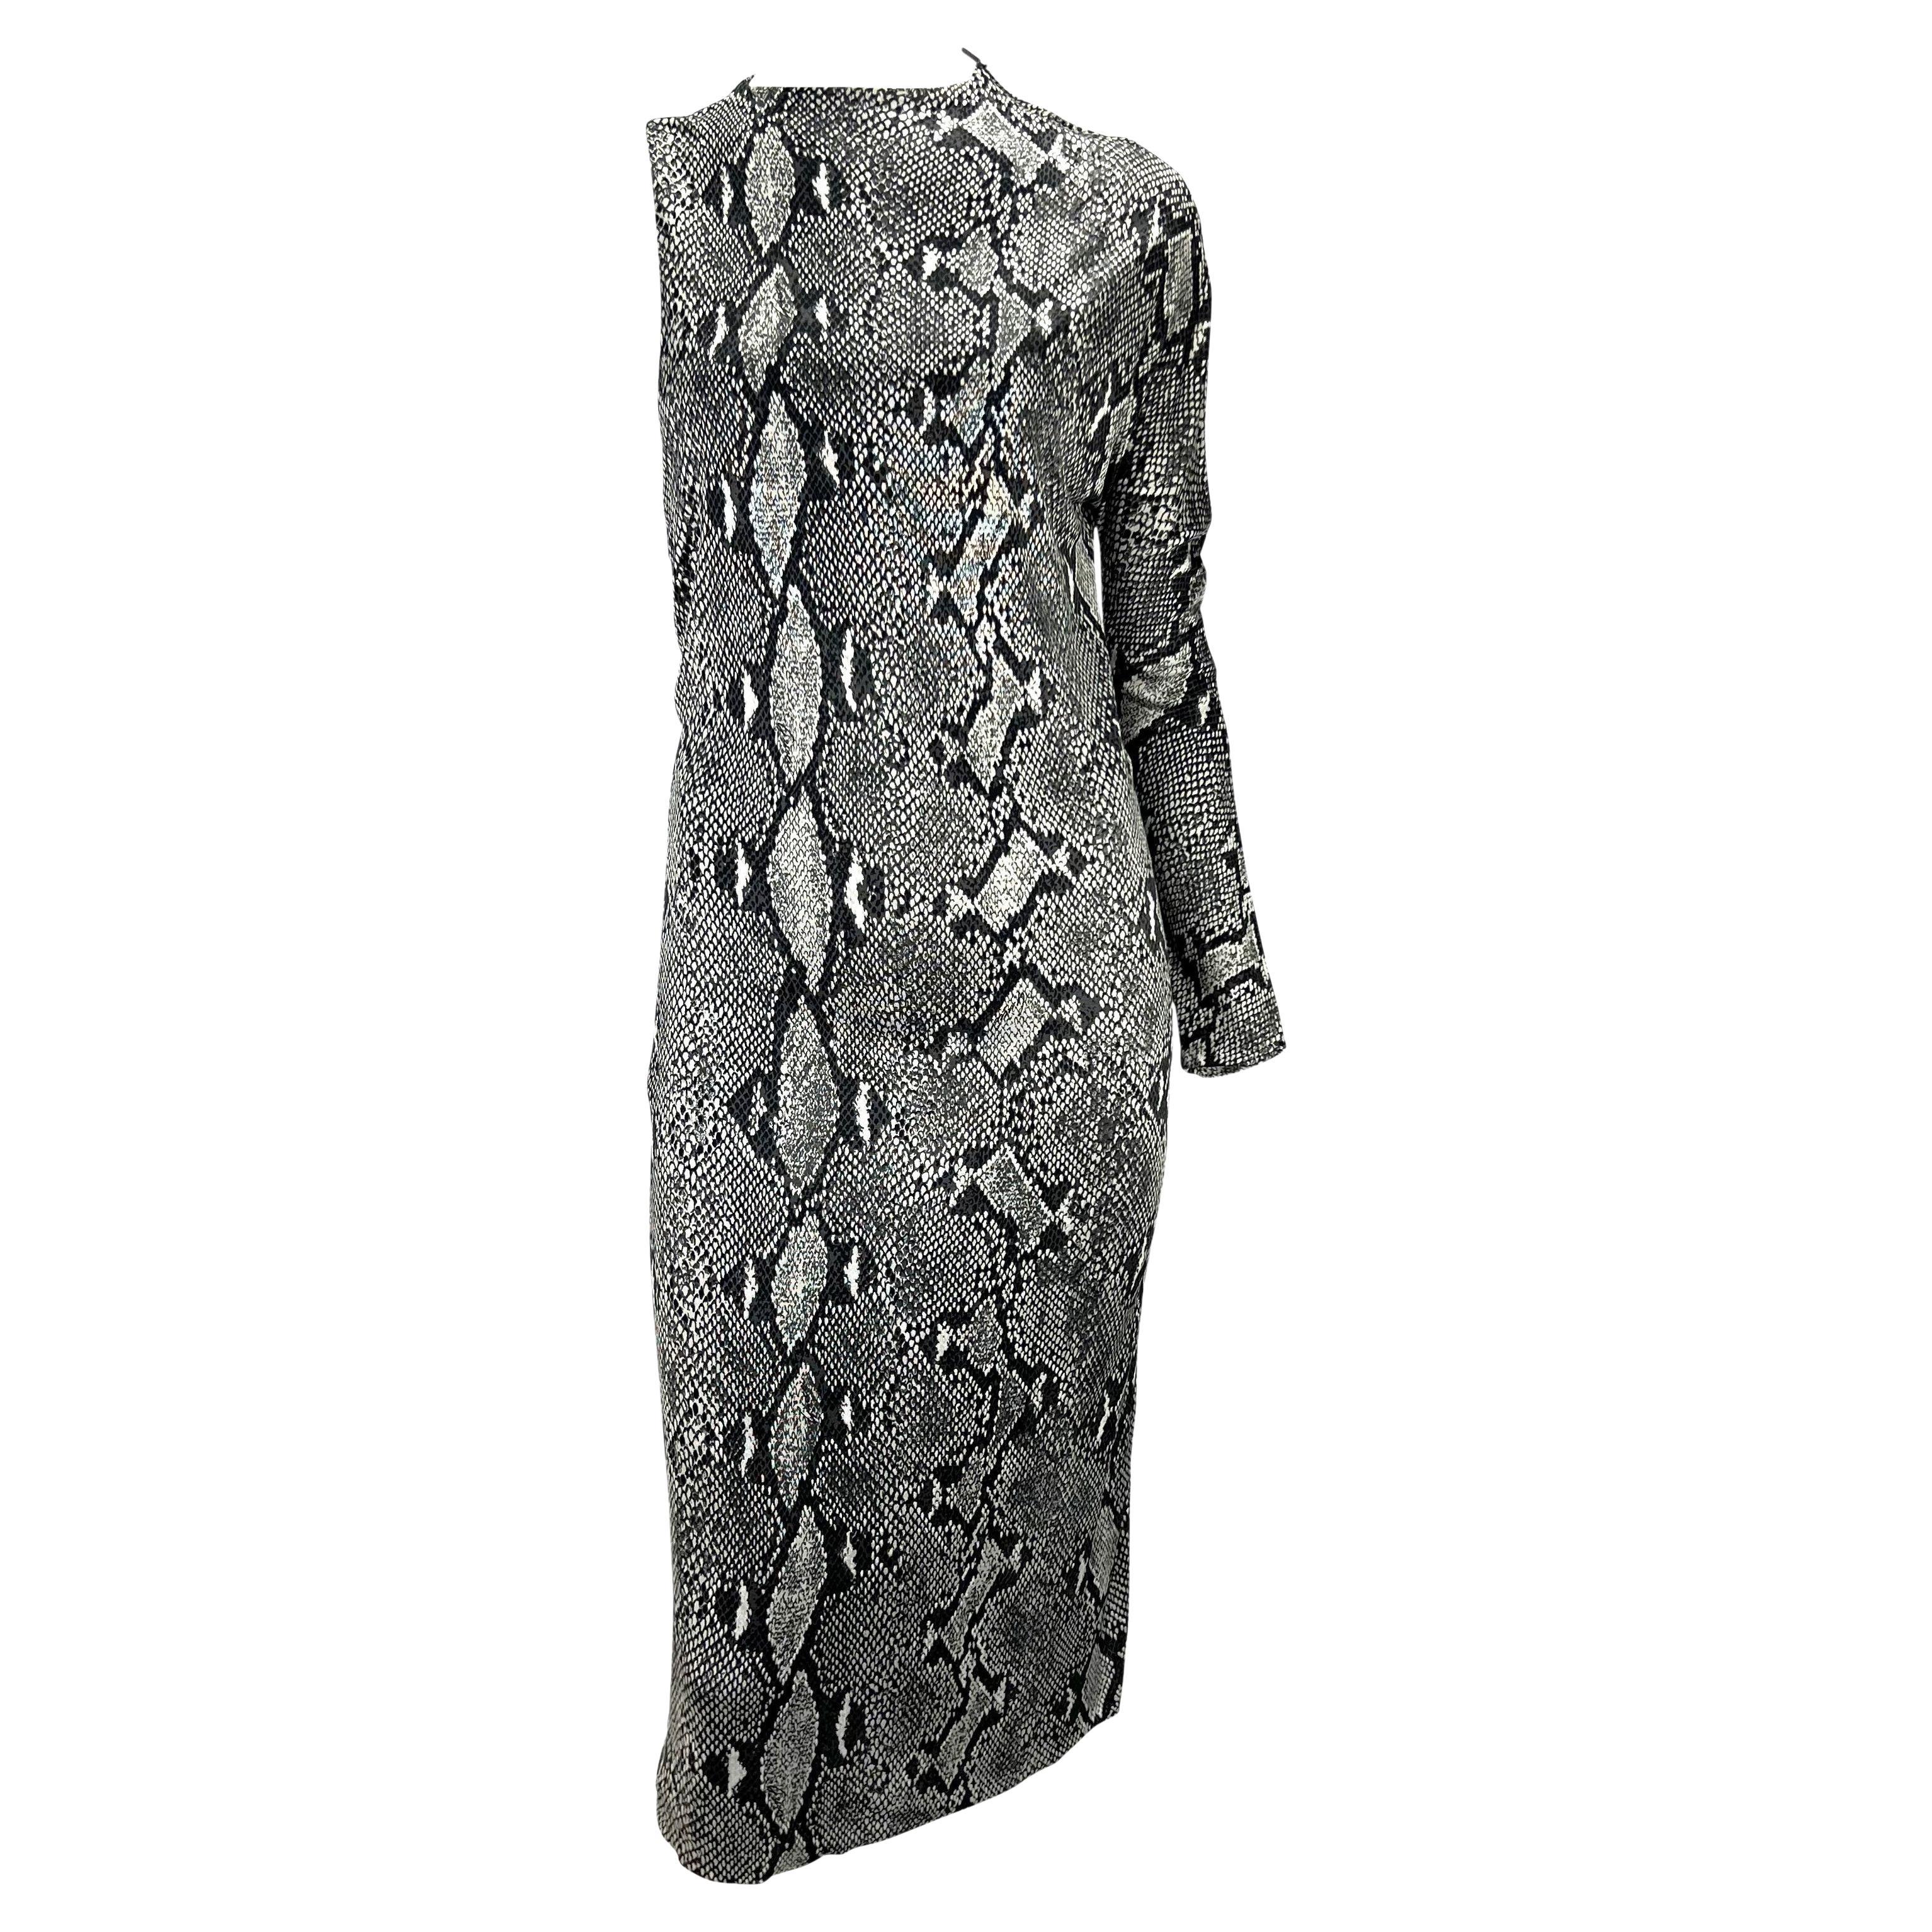 S/S 2000 Gucci by Tom Ford Grey Snake Print Asymmetric One Sleeve Dress For Sale